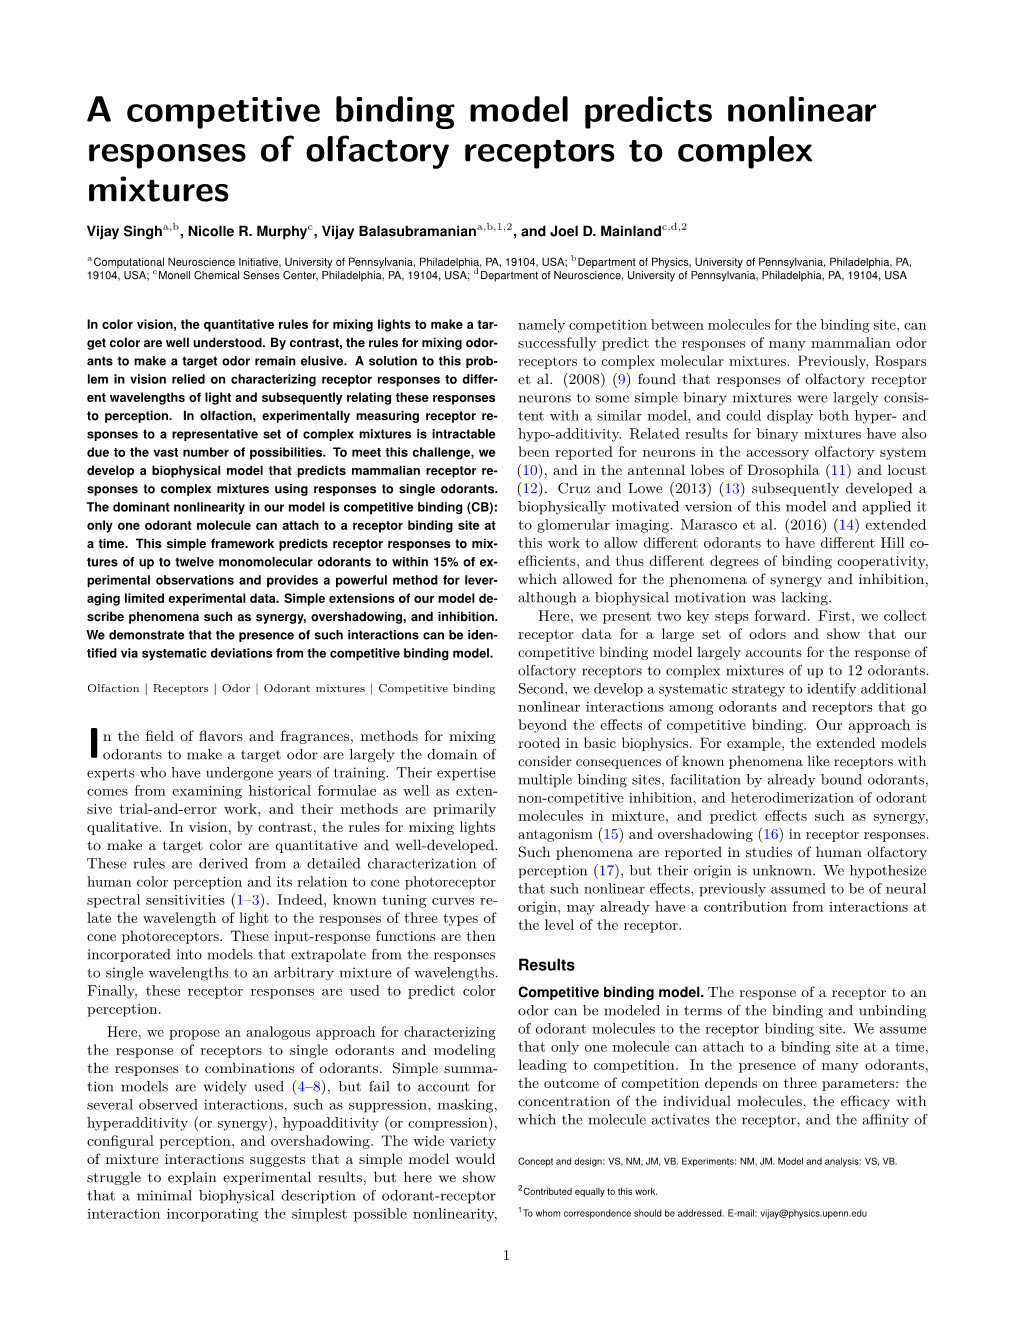 A Competitive Binding Model Predicts Nonlinear Responses of Olfactory Receptors to Complex Mixtures Vijay Singha,B, Nicolle R